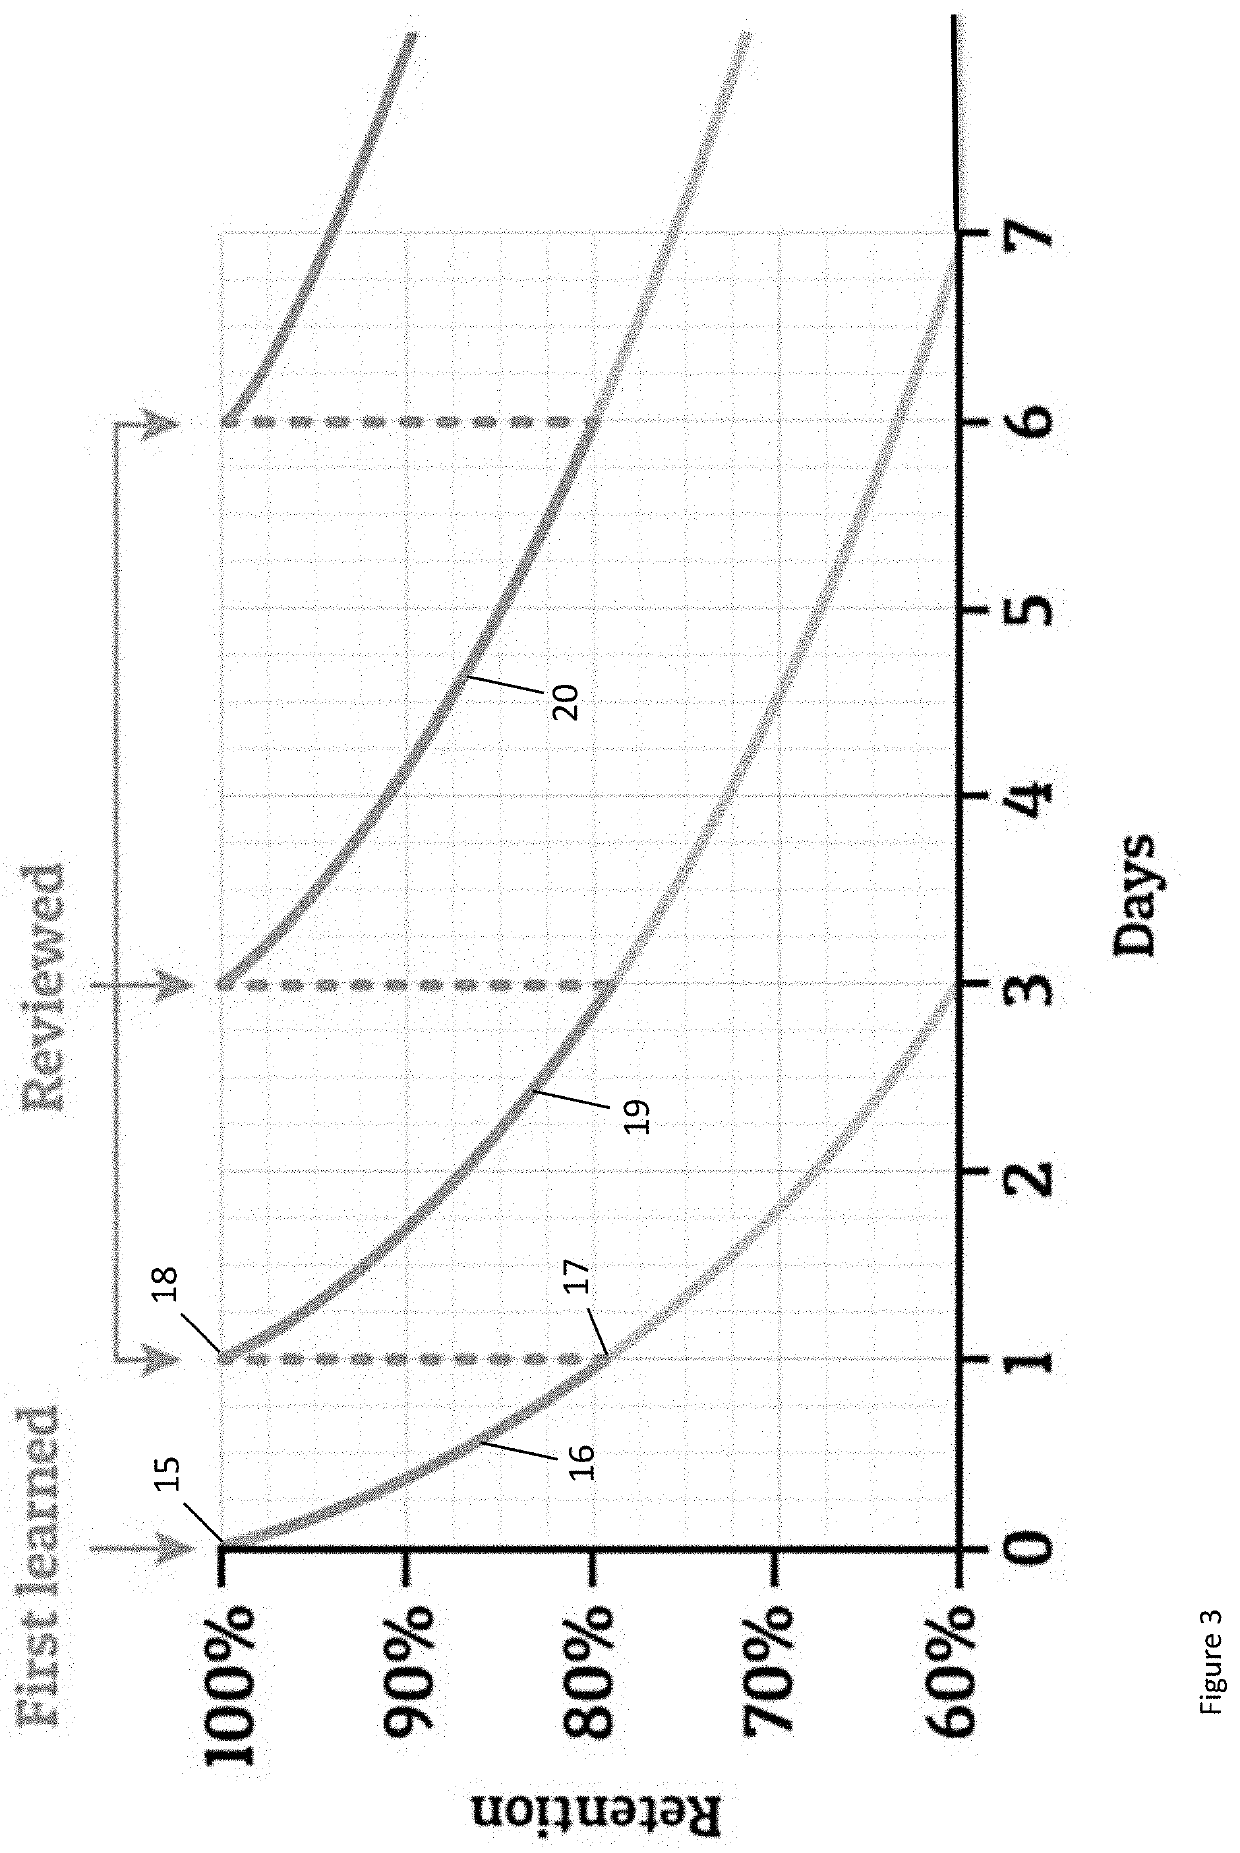 Augmented Cognition Methods And Apparatus For Contemporaneous Feedback In Psychomotor Learning